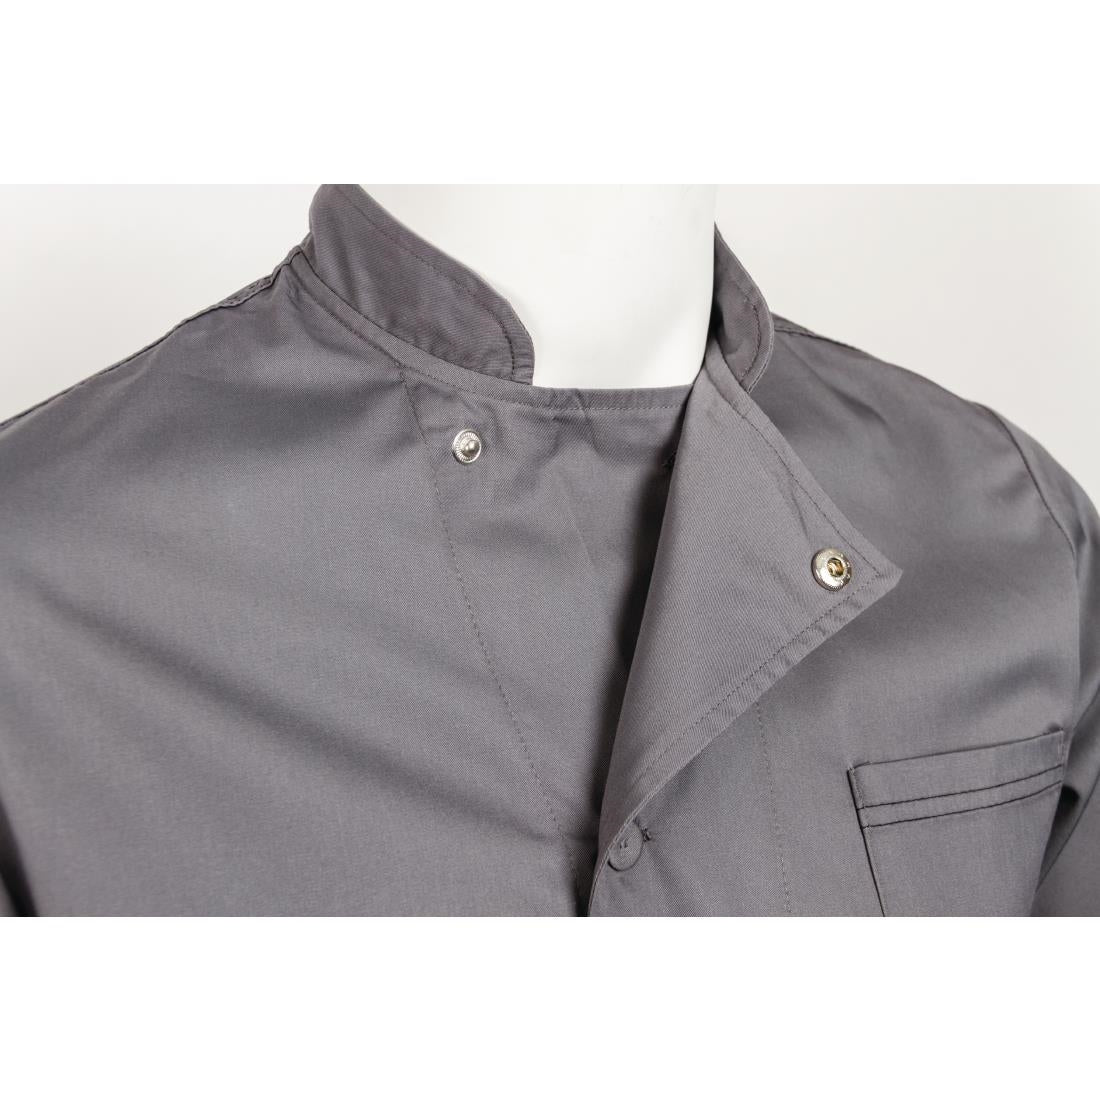 Chef Works Valais Signature Series Unisex Chefs Jacket JD Catering Equipment Solutions Ltd